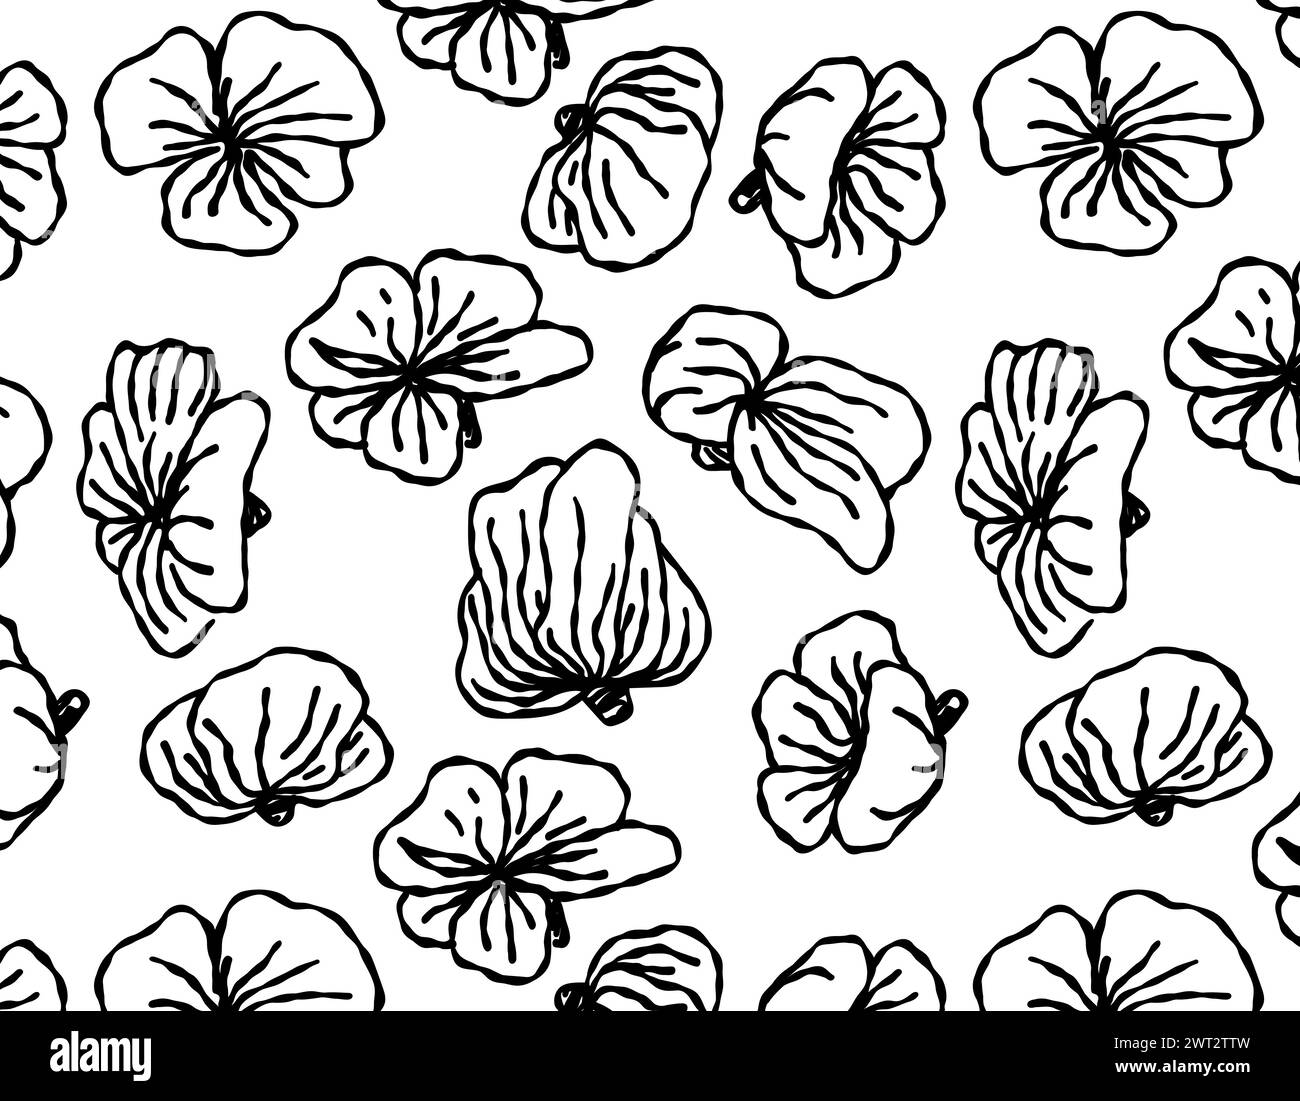 Seamless pattern with black brush flowers on a white background. Ink drawing of wild plants, herbs or flowers. Abstract organic background. Stock Vector